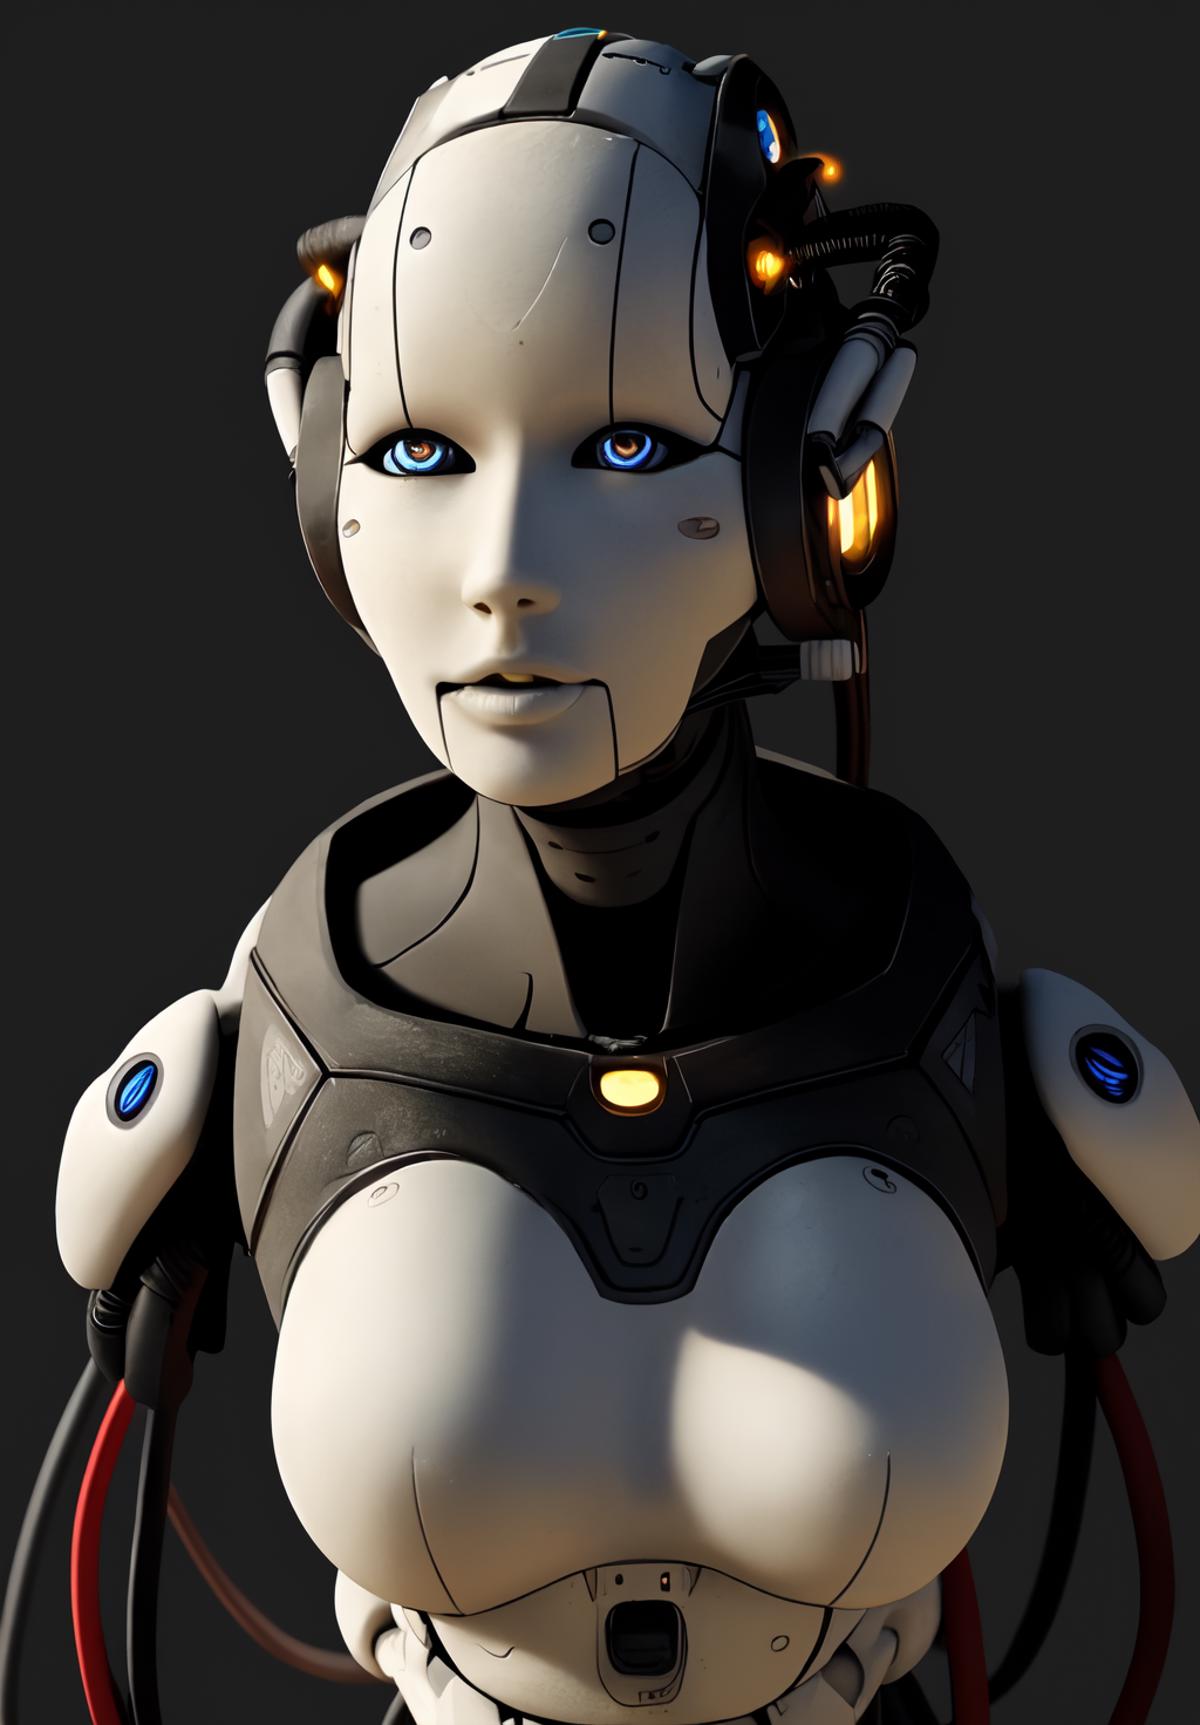 AI model image by AsaTyr